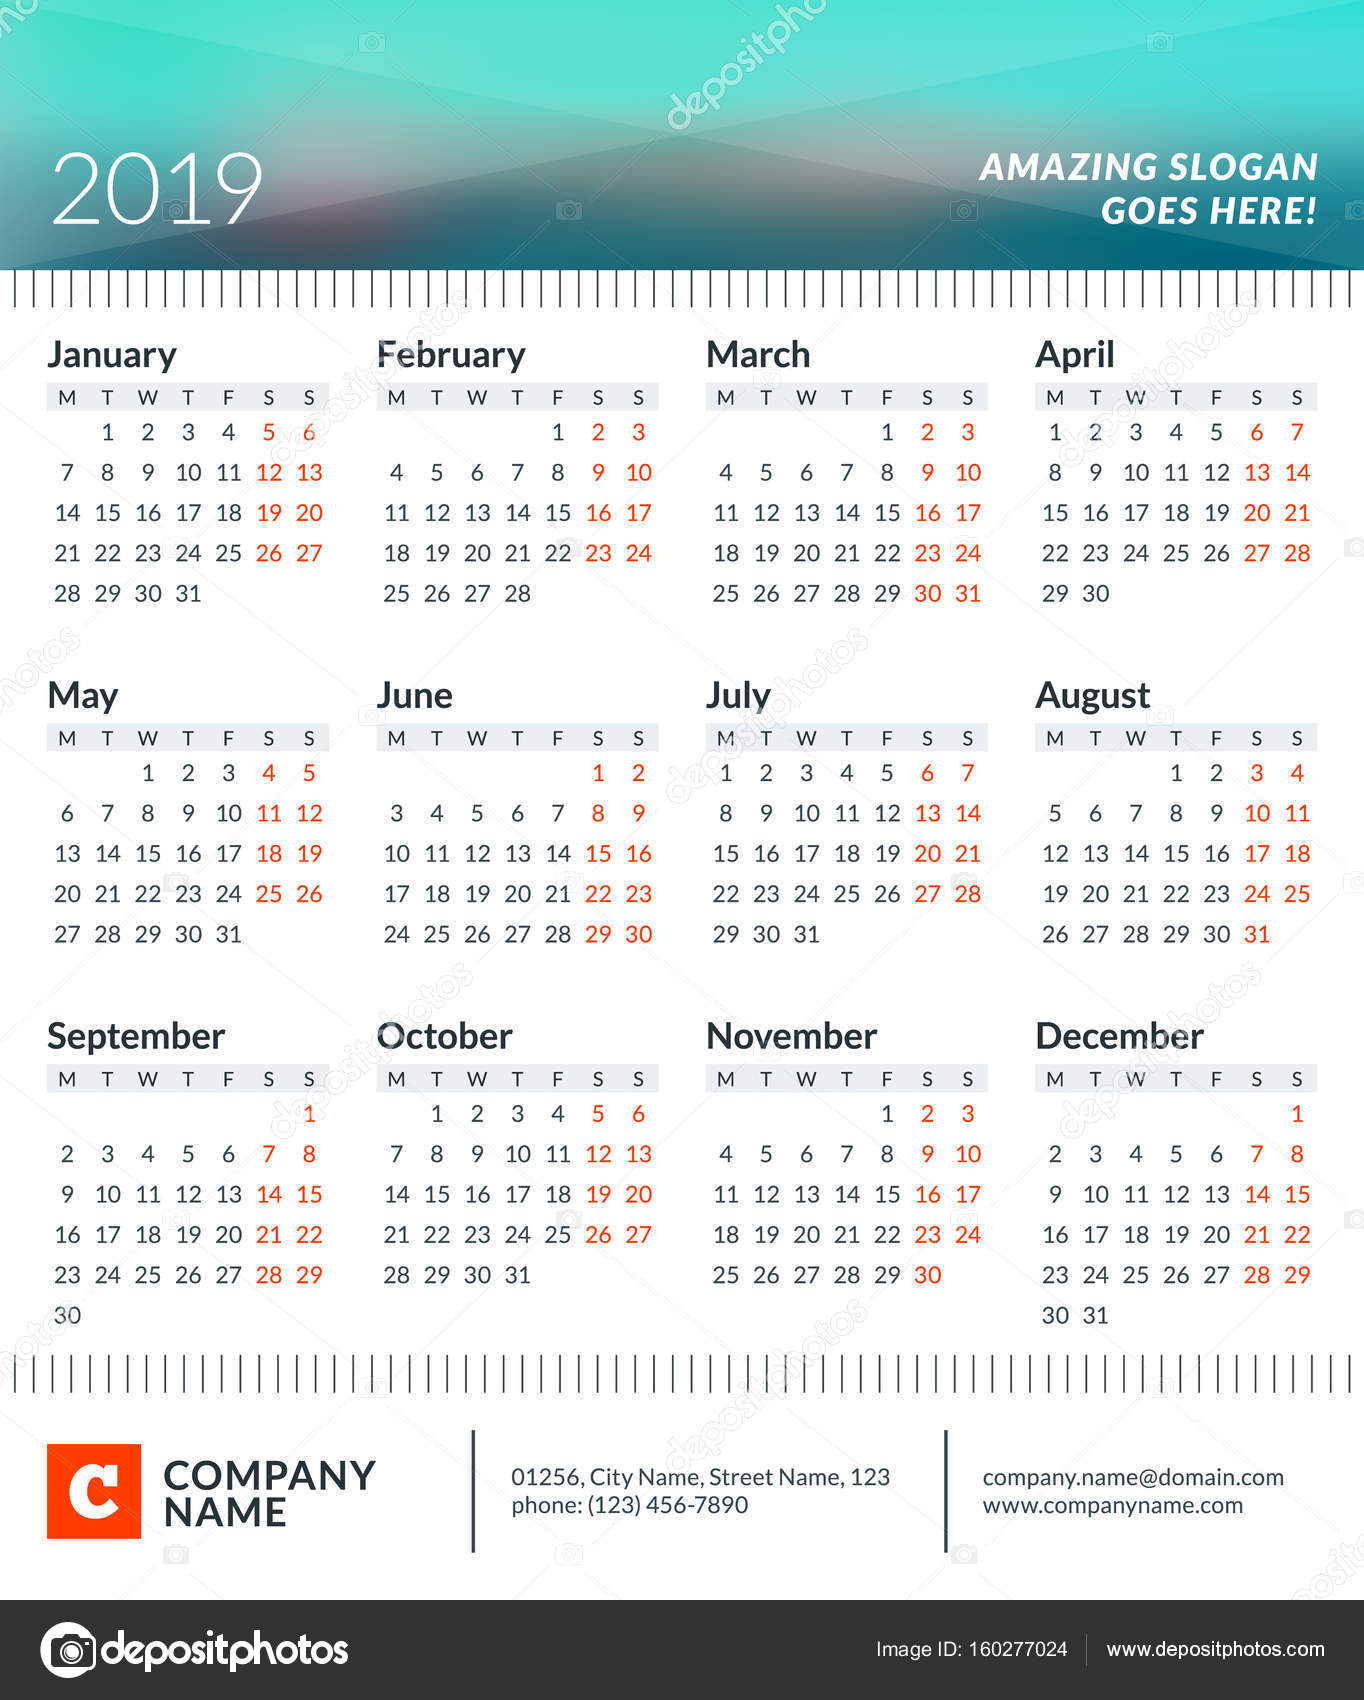 Calendar Poster For 19 Year Week Starts On Monday 12 Months On Page Vector Design Print Template With Place For Photo And Company Information Stock Vector C Mikhailmorosin